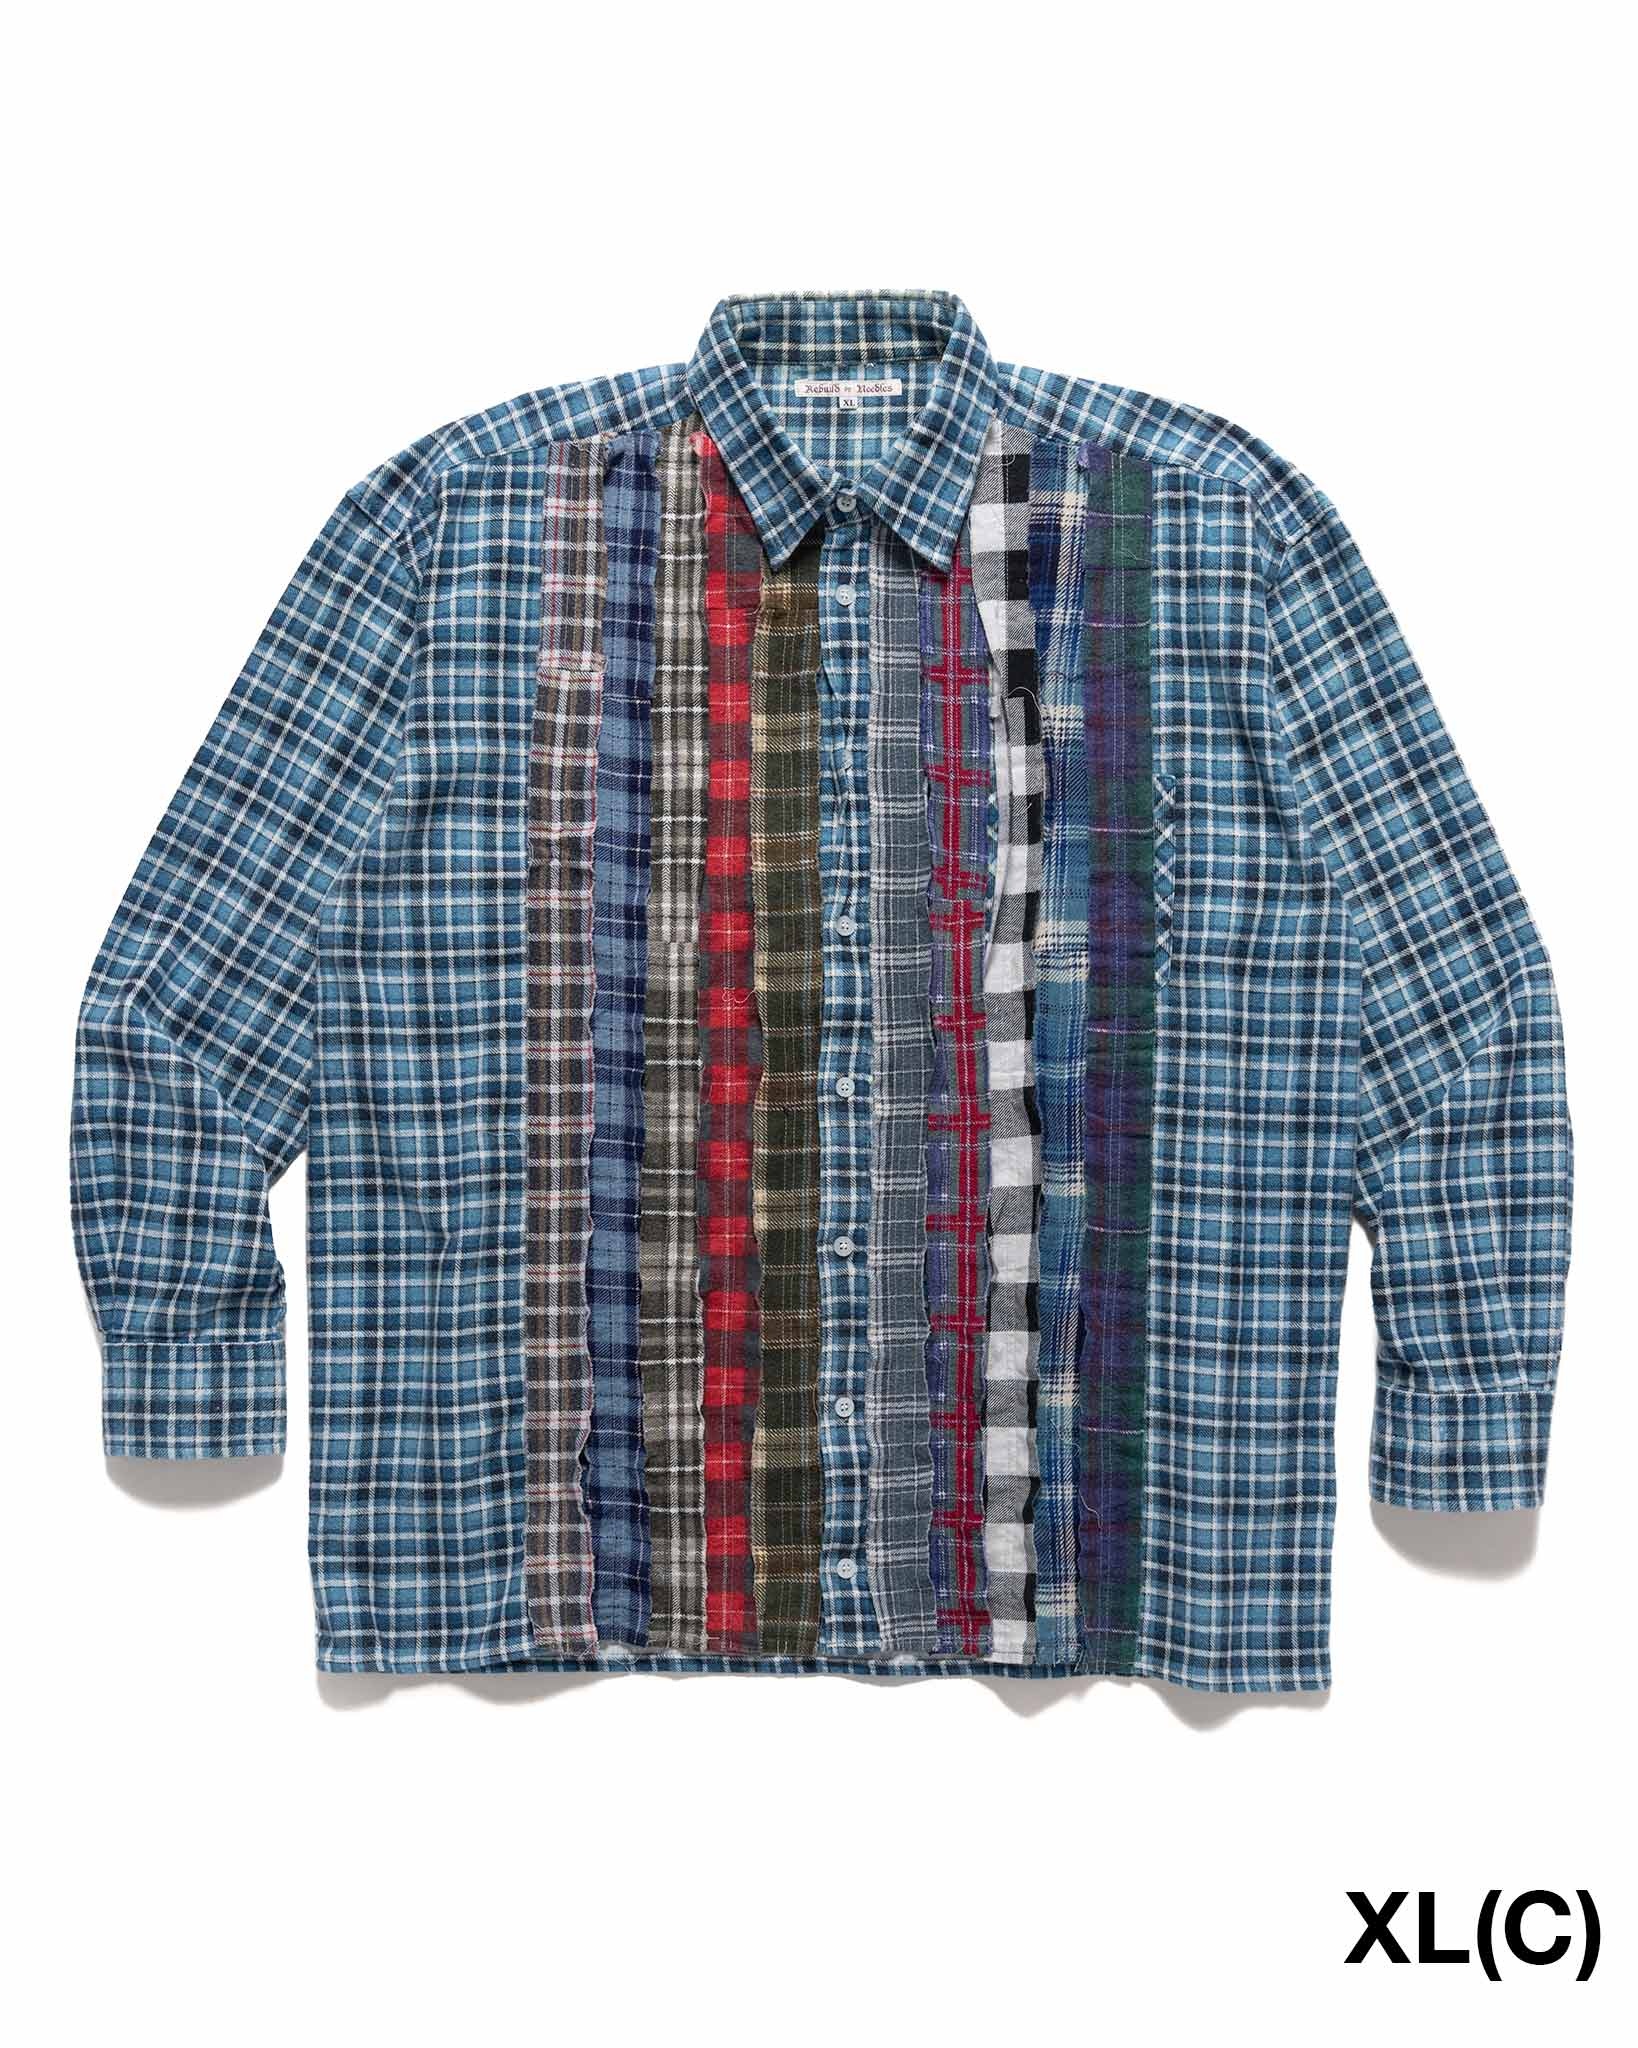 Rebuild by Needles Flannel Shirt -> Ribbon Shirt Assorted - 19